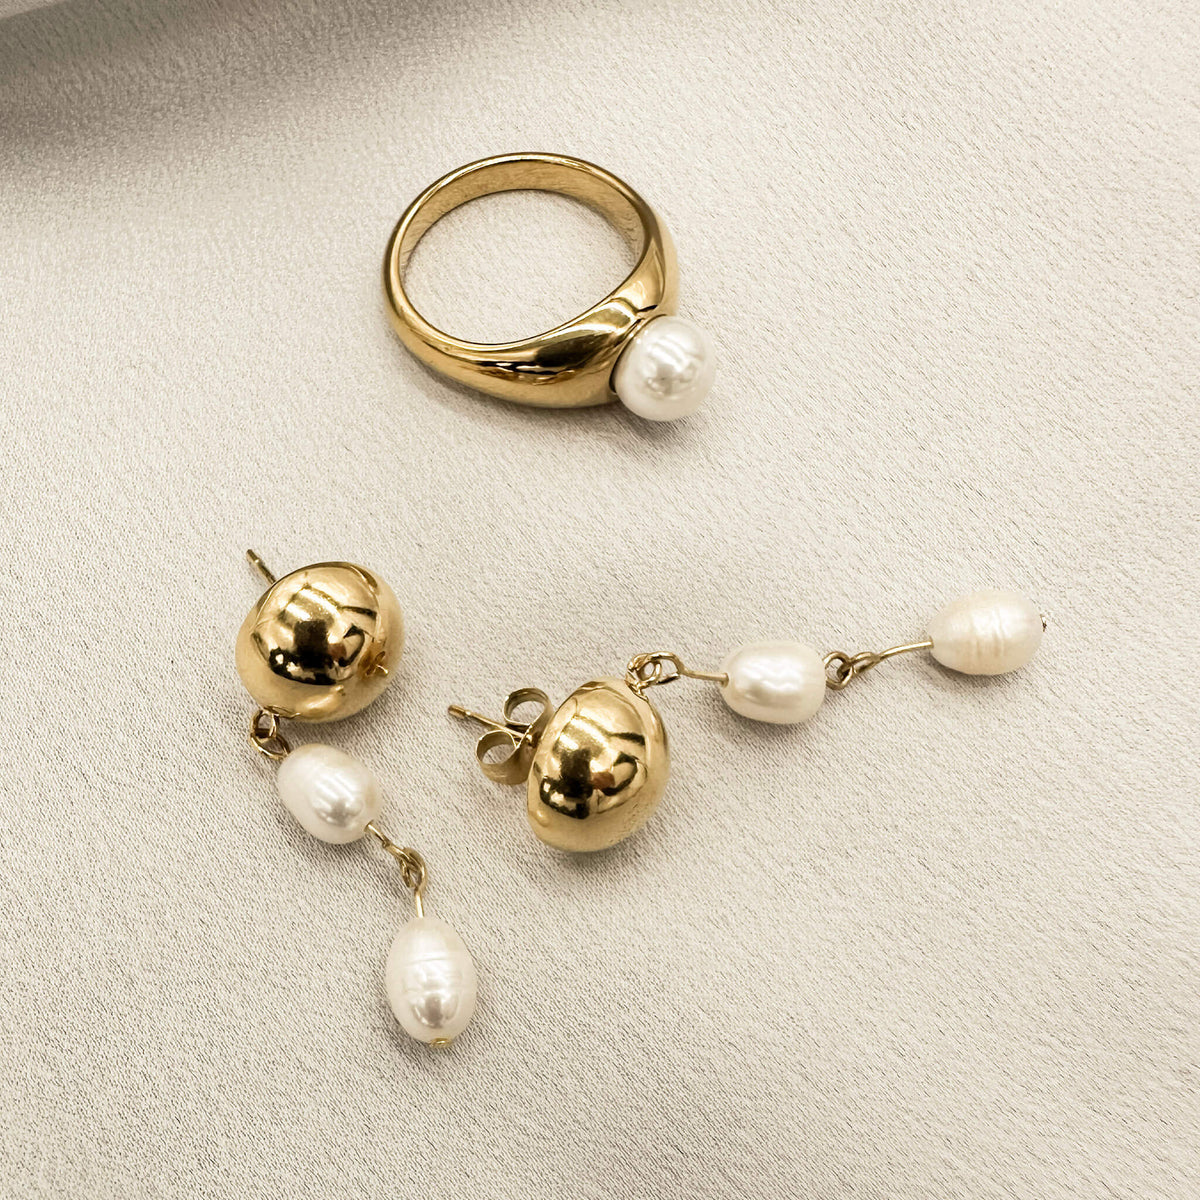 freshwater pearl earrings with a gold stud laid down beside a gold ring with a faux pearl